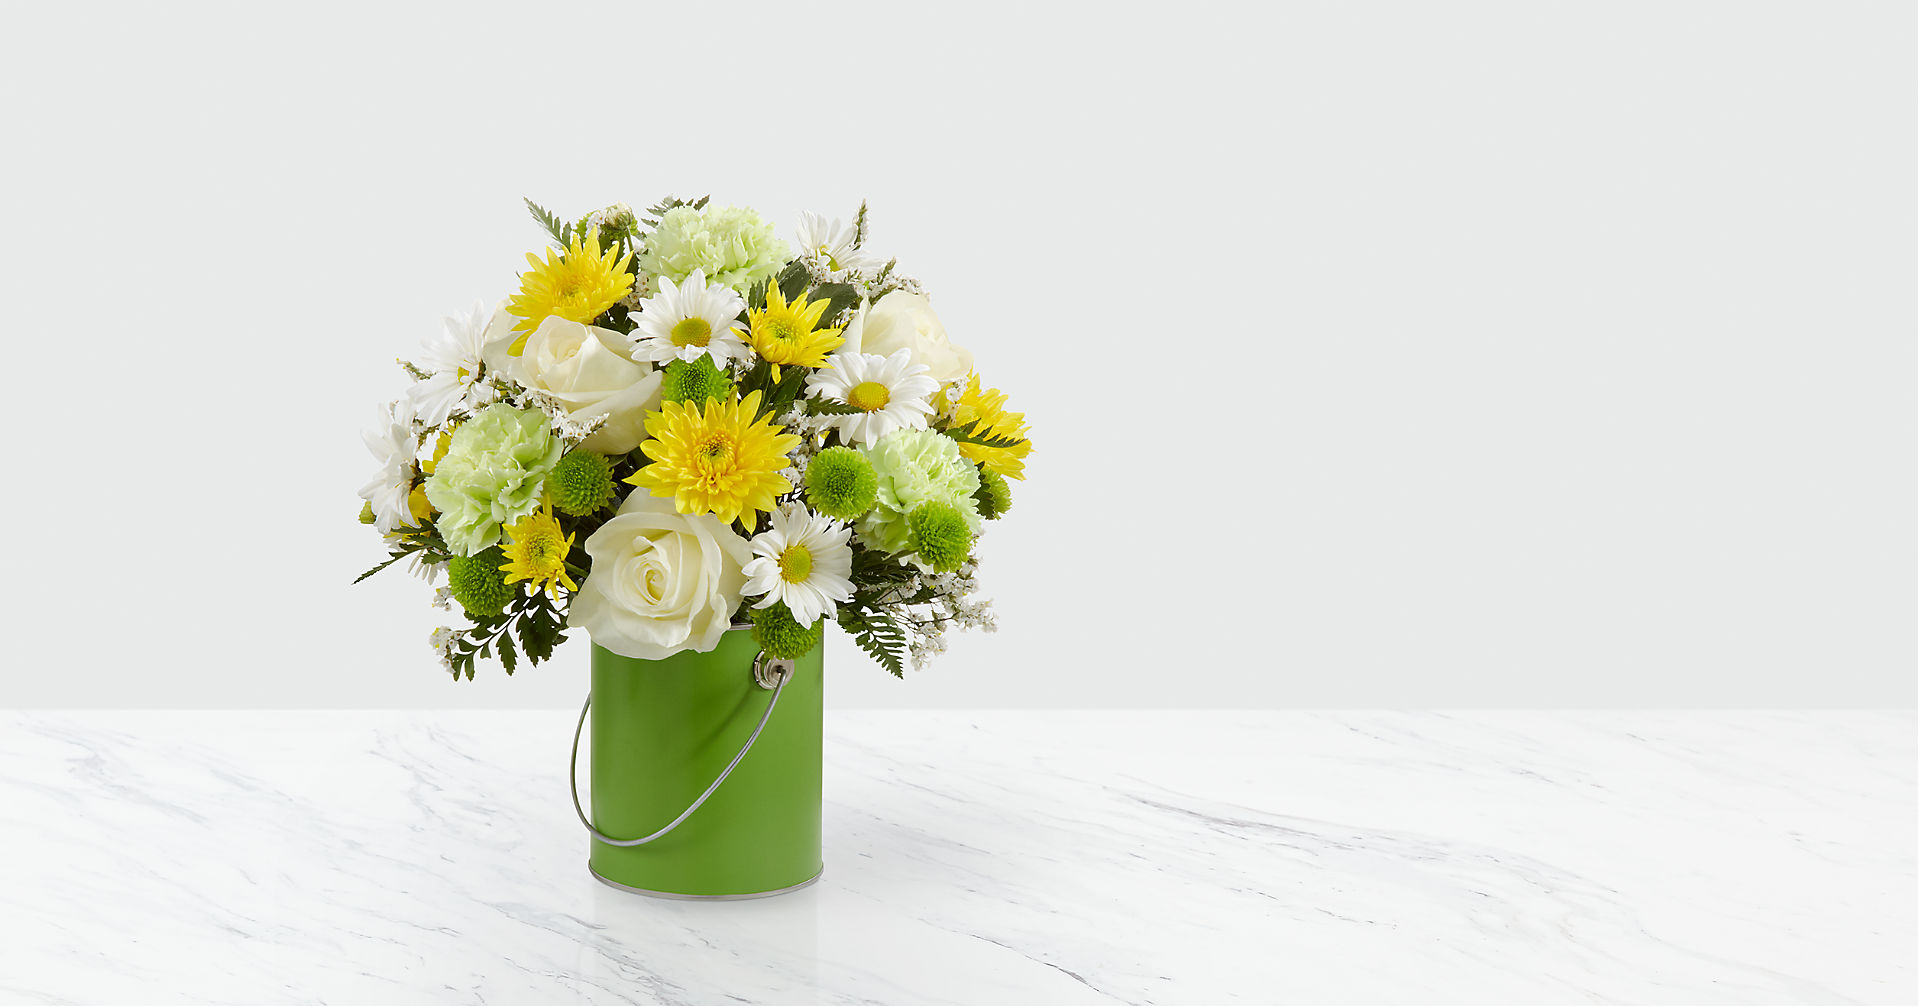 The Color Your Day With Joy™ Bouquet Flower Bouquet